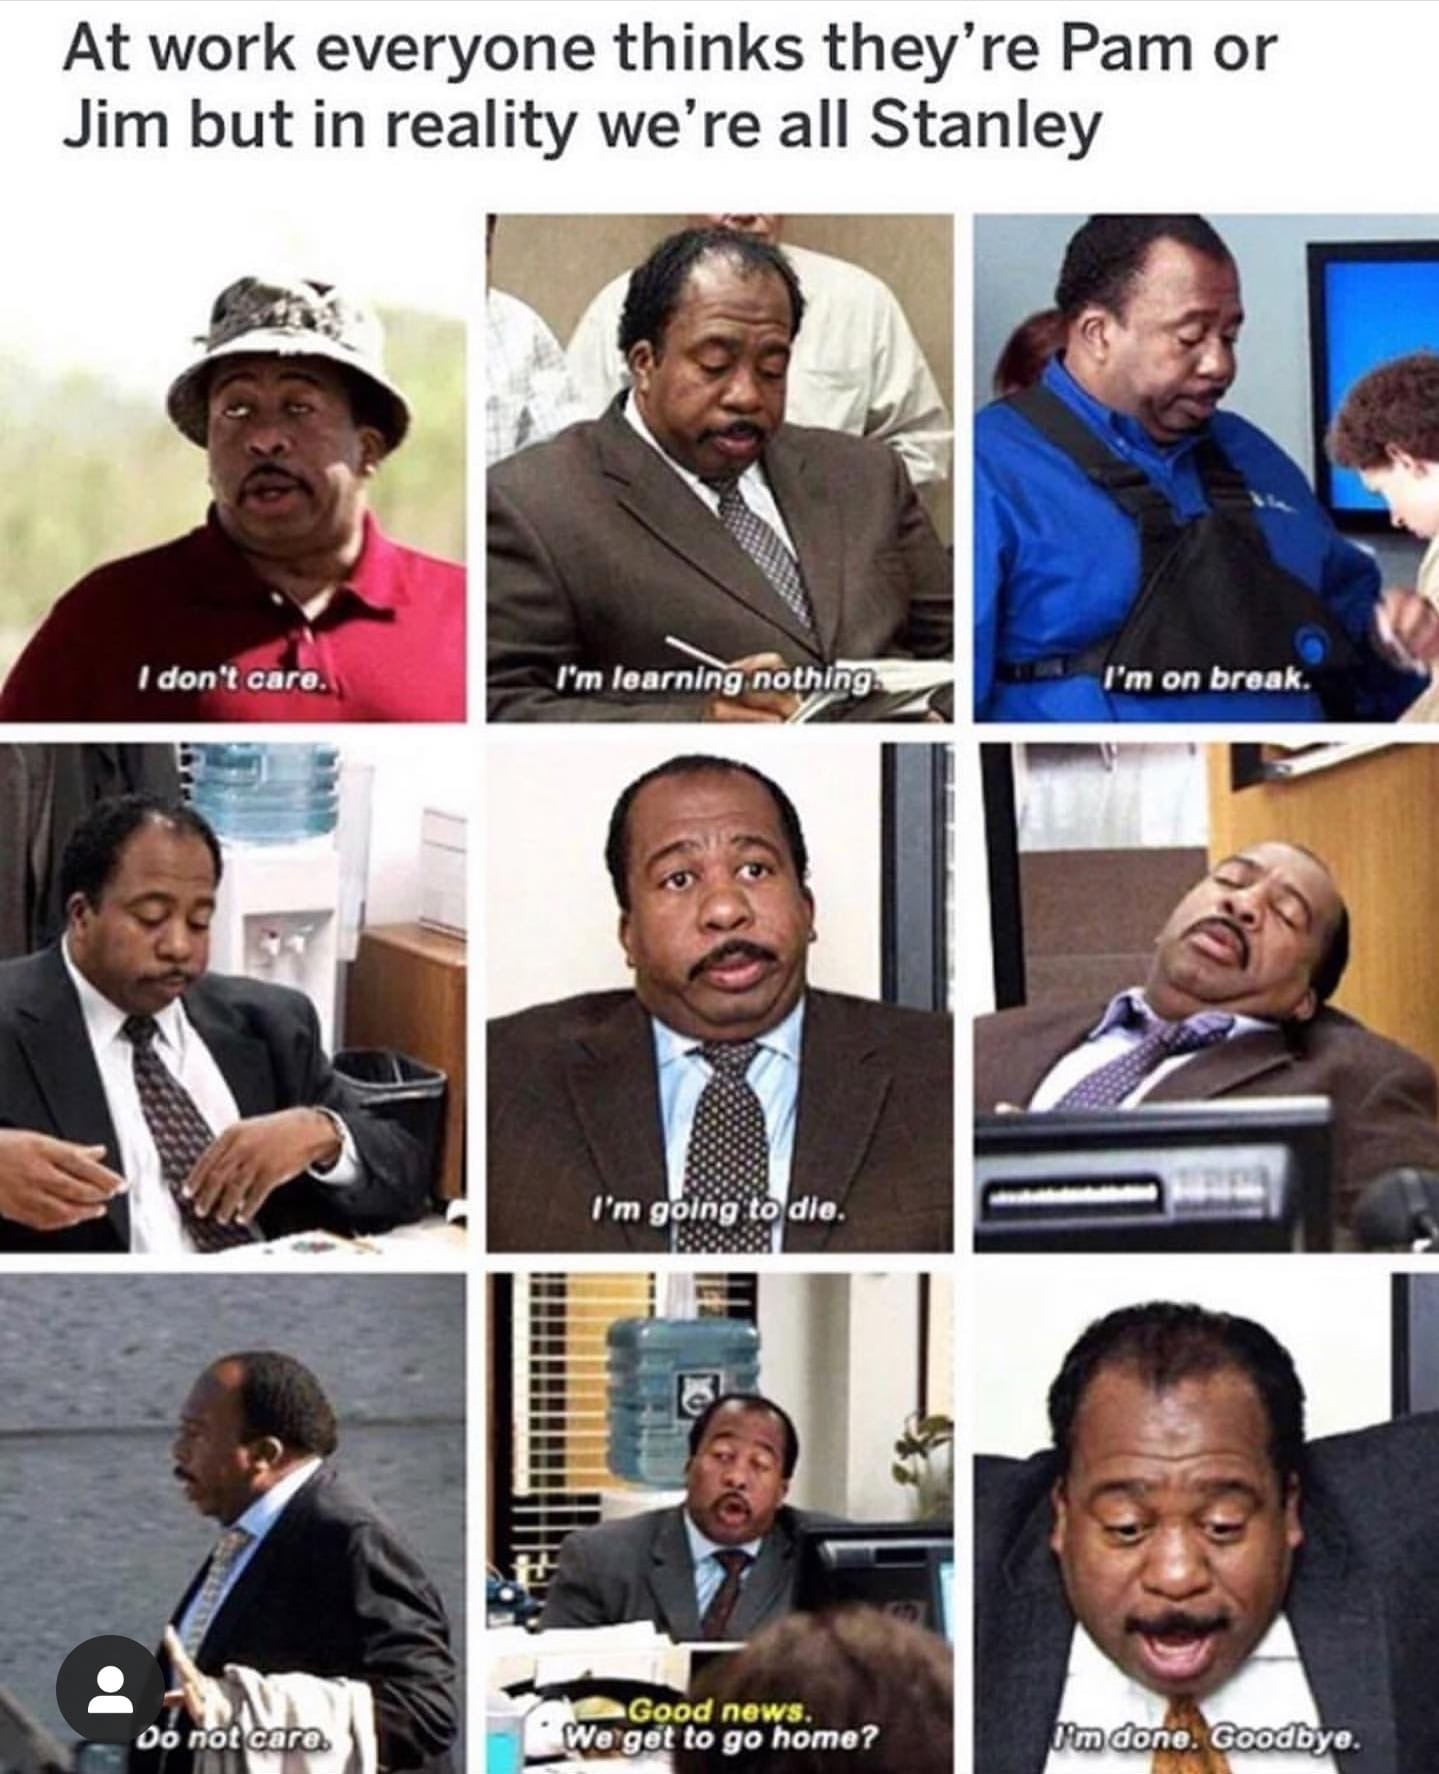 work everyone thinks they re pam - At work everyone thinks they're Pam or Jim but in reality we're all Stanley I don't care. I'm learning nothing I'm on break. I'm going to die. Do not care Good news. We get to go home? I'm done. Goodbye.